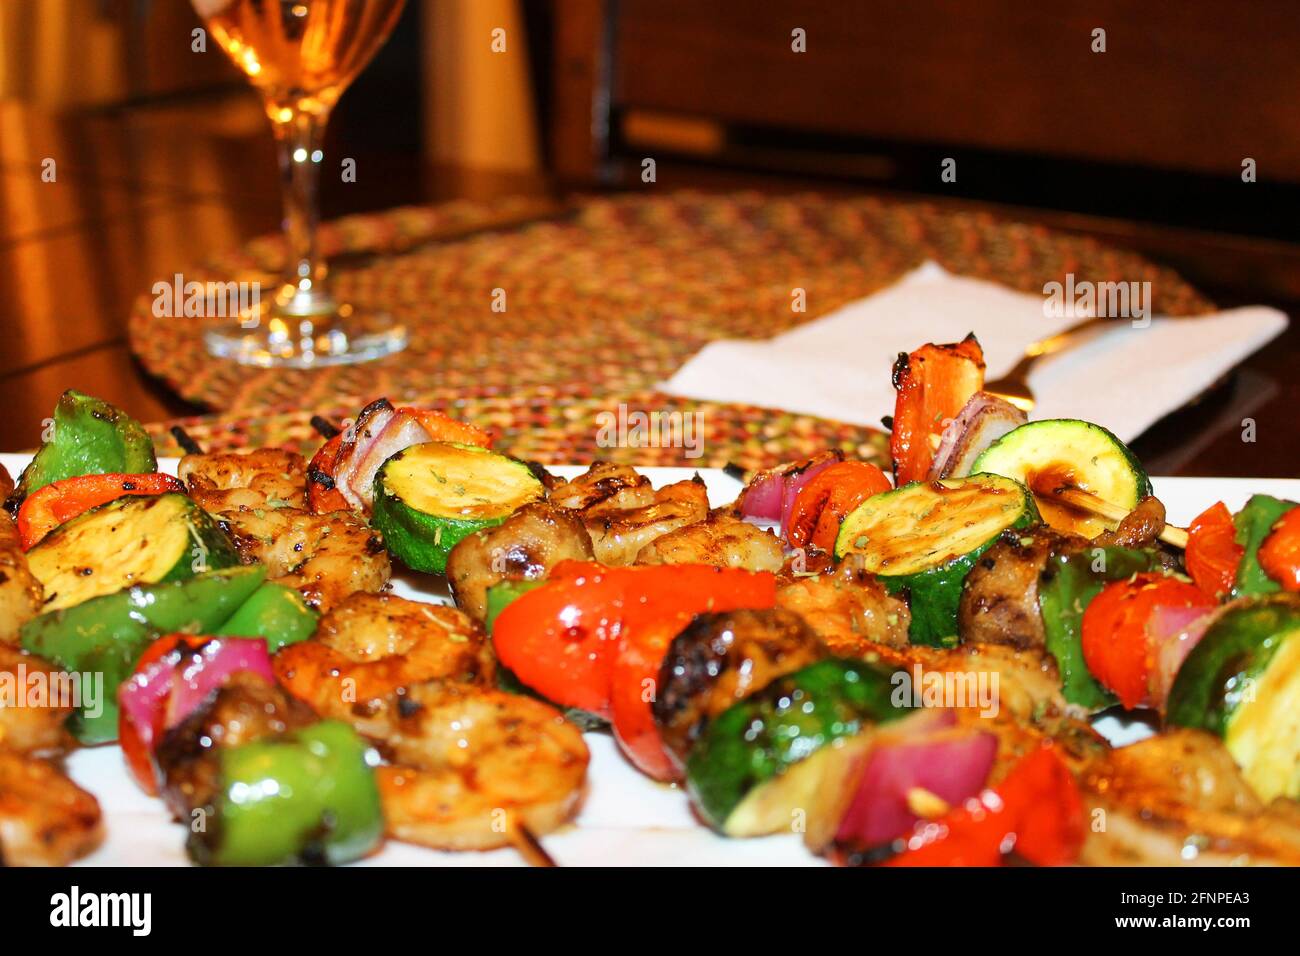 Close-up of grilled vegetable and shrimp skewers on a serving dish. Place setting with glass of wine out of focus in background. Stock Photo